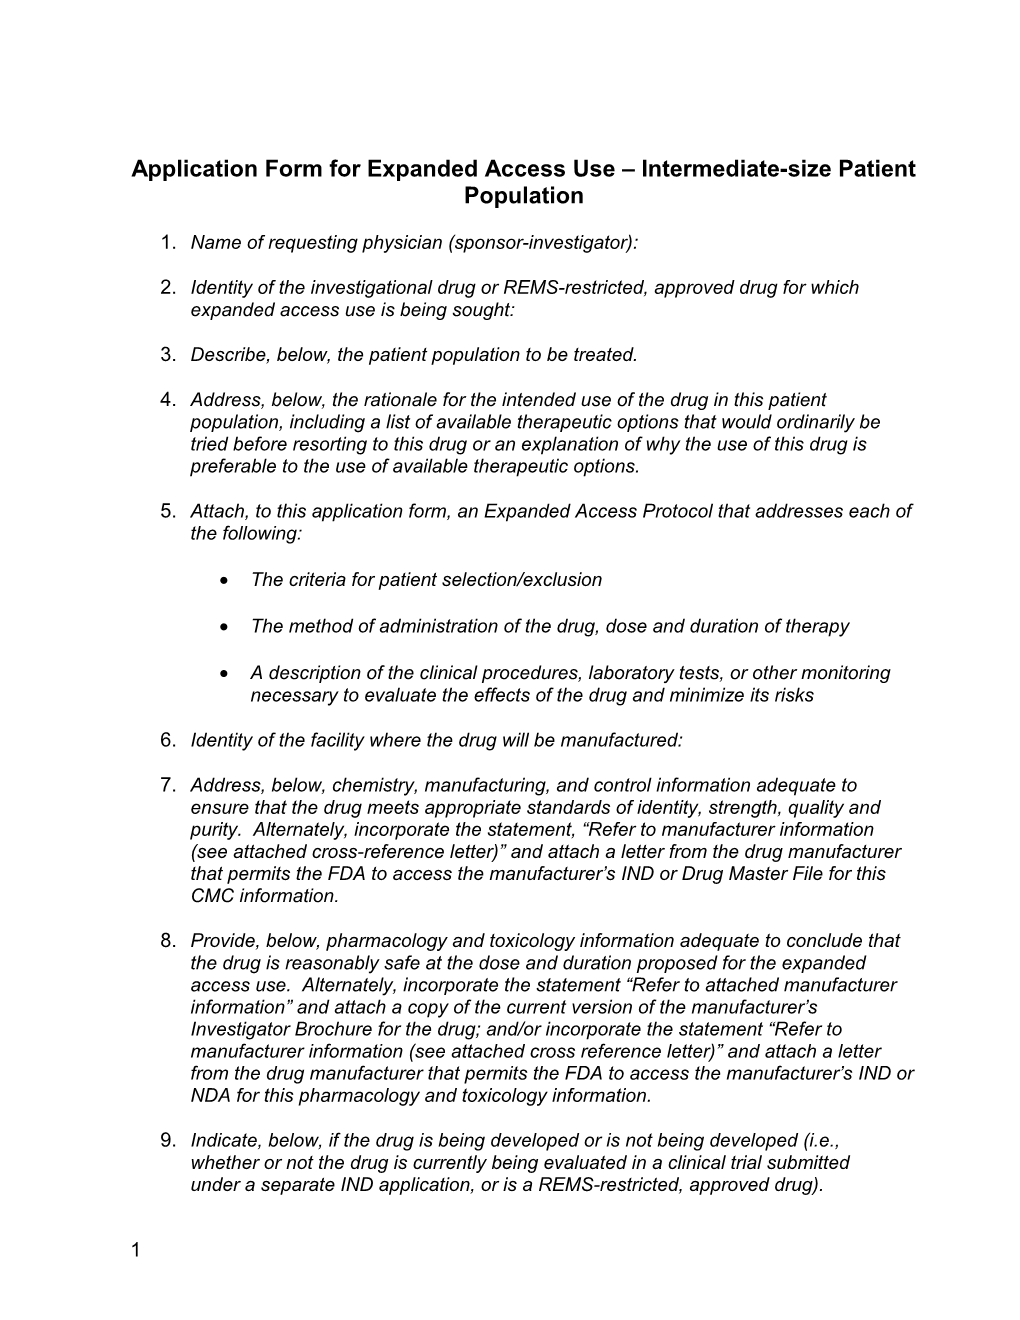 Appliapplication Form for Expanded Access Use Intermediate-Size Patient Population